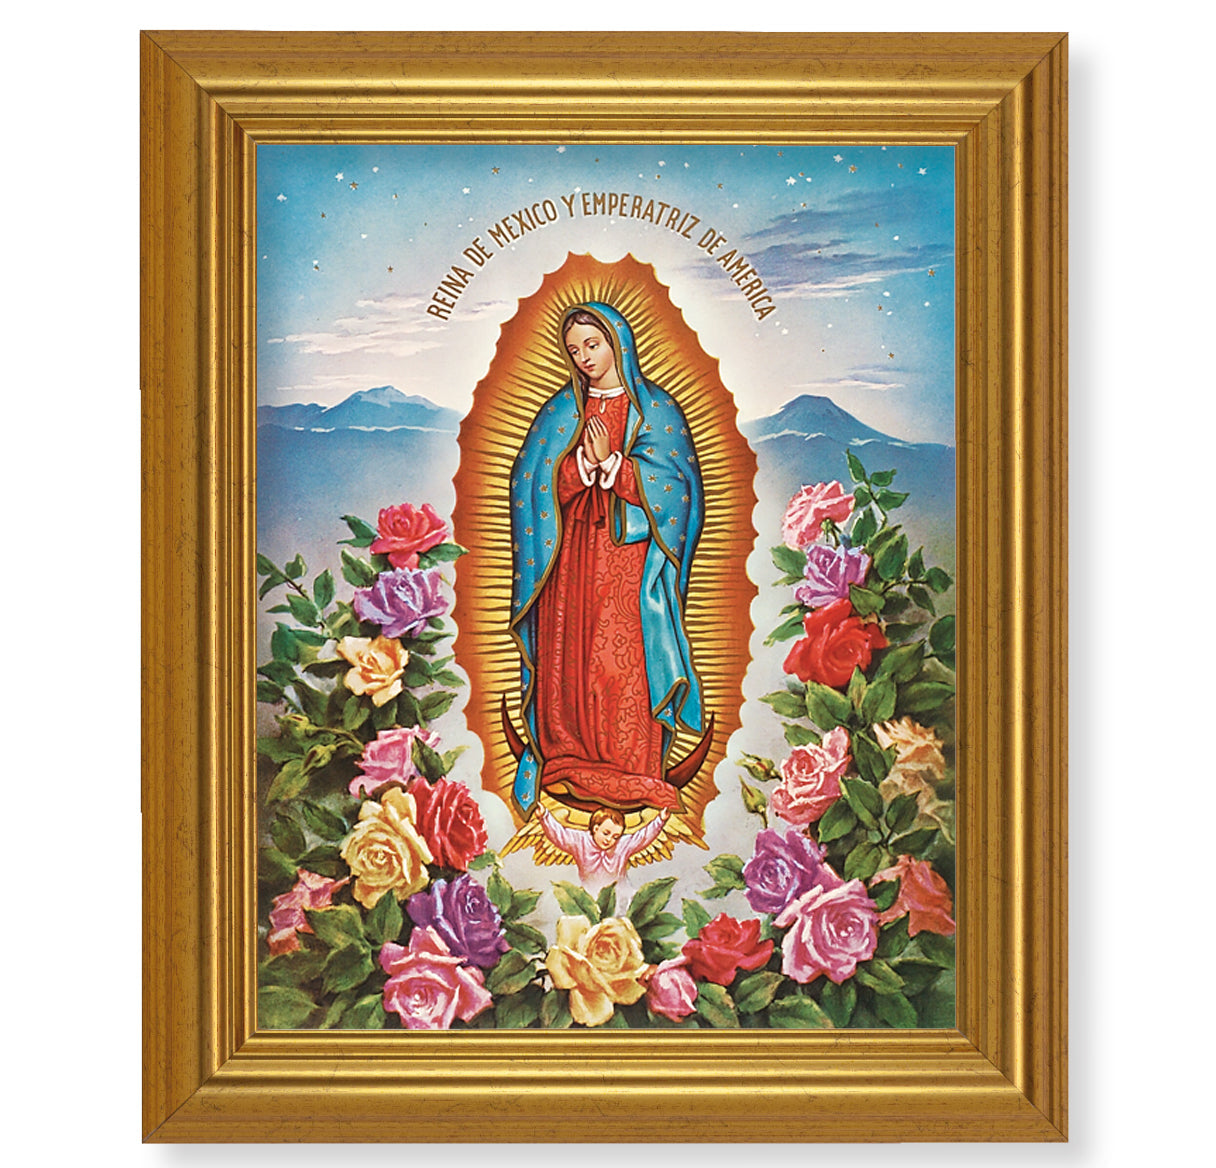 Our Lady of Guadalupe Picture Framed Wall Art Decor, Large, Antique Gold-Leaf Classic Frame